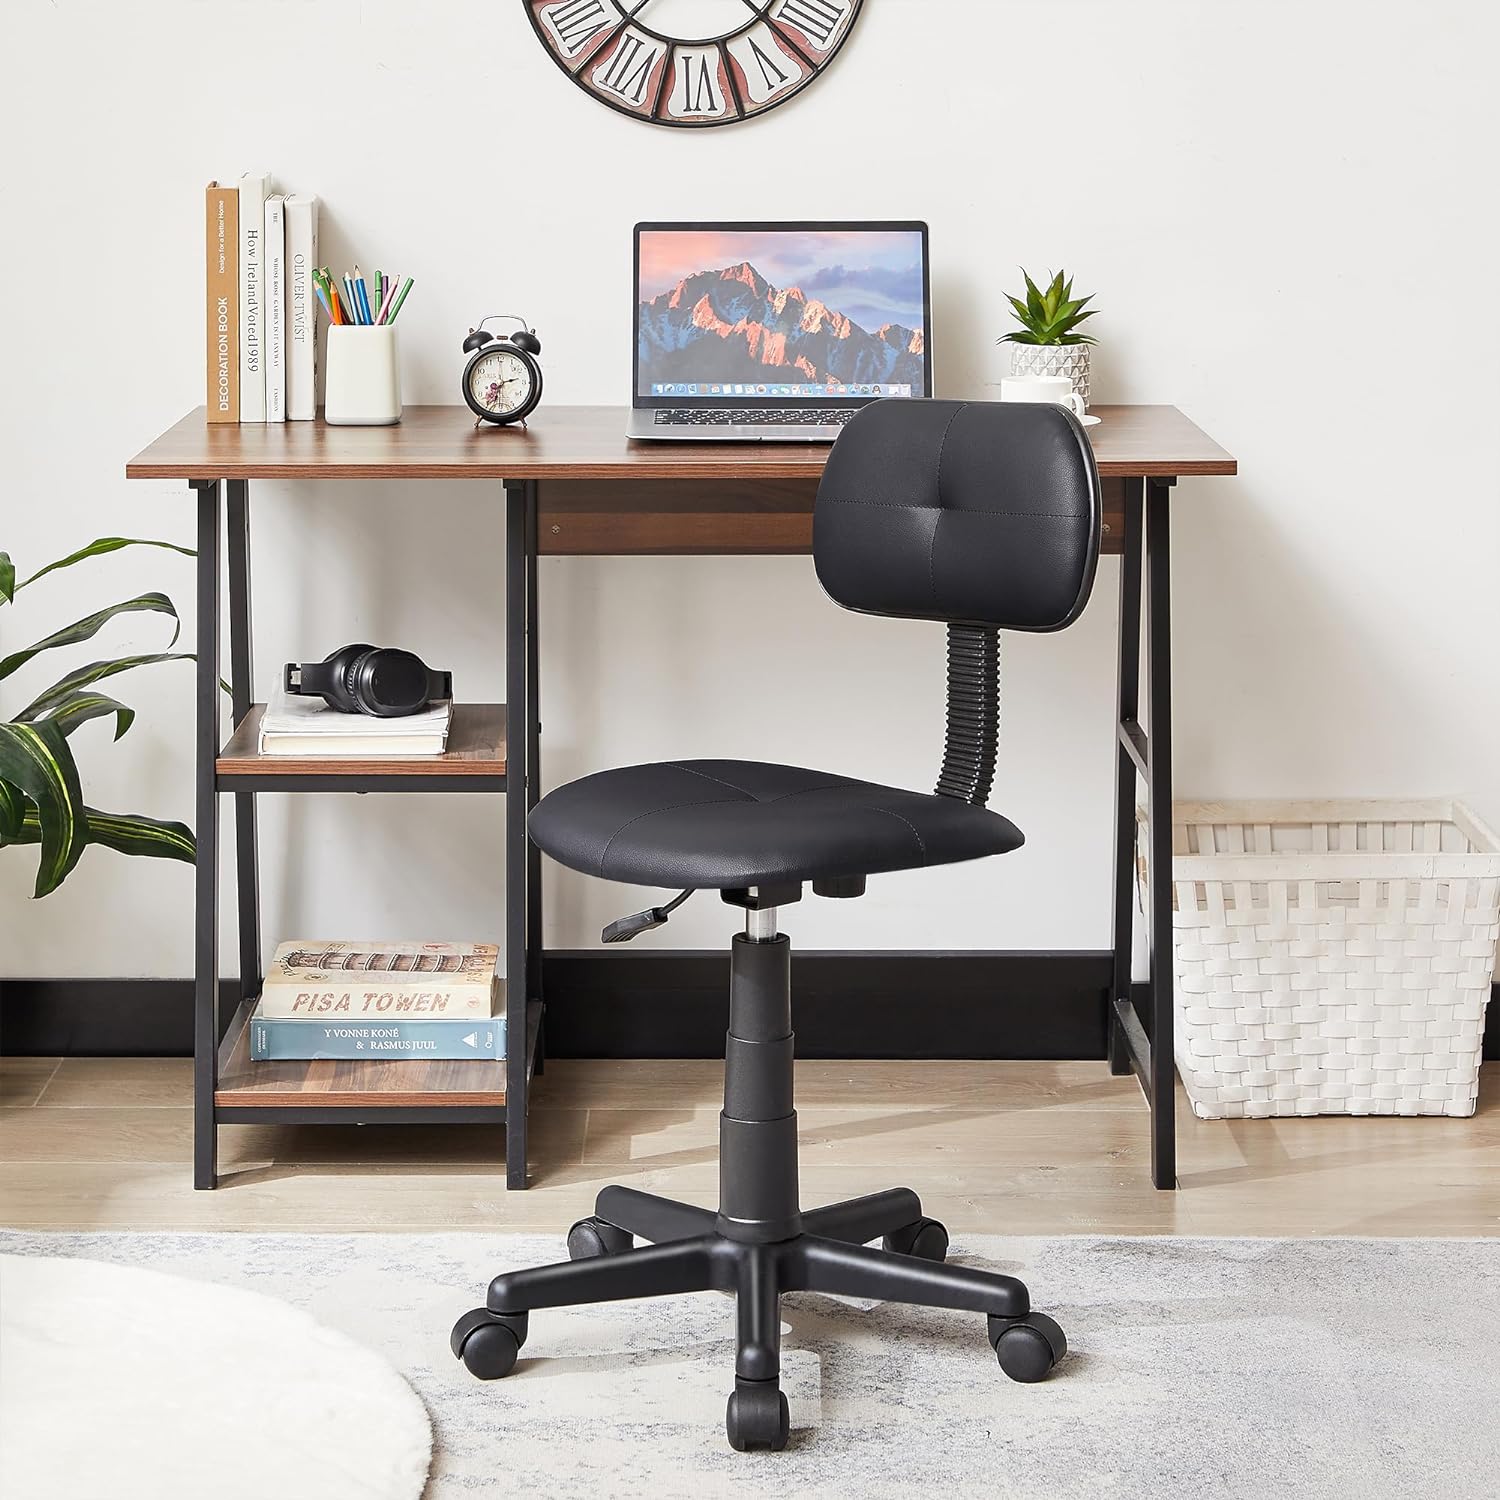 VECELO Armless Home Office Chair Low-Back Height Adjustable Stools for Desk/Computer/Task/Small Space